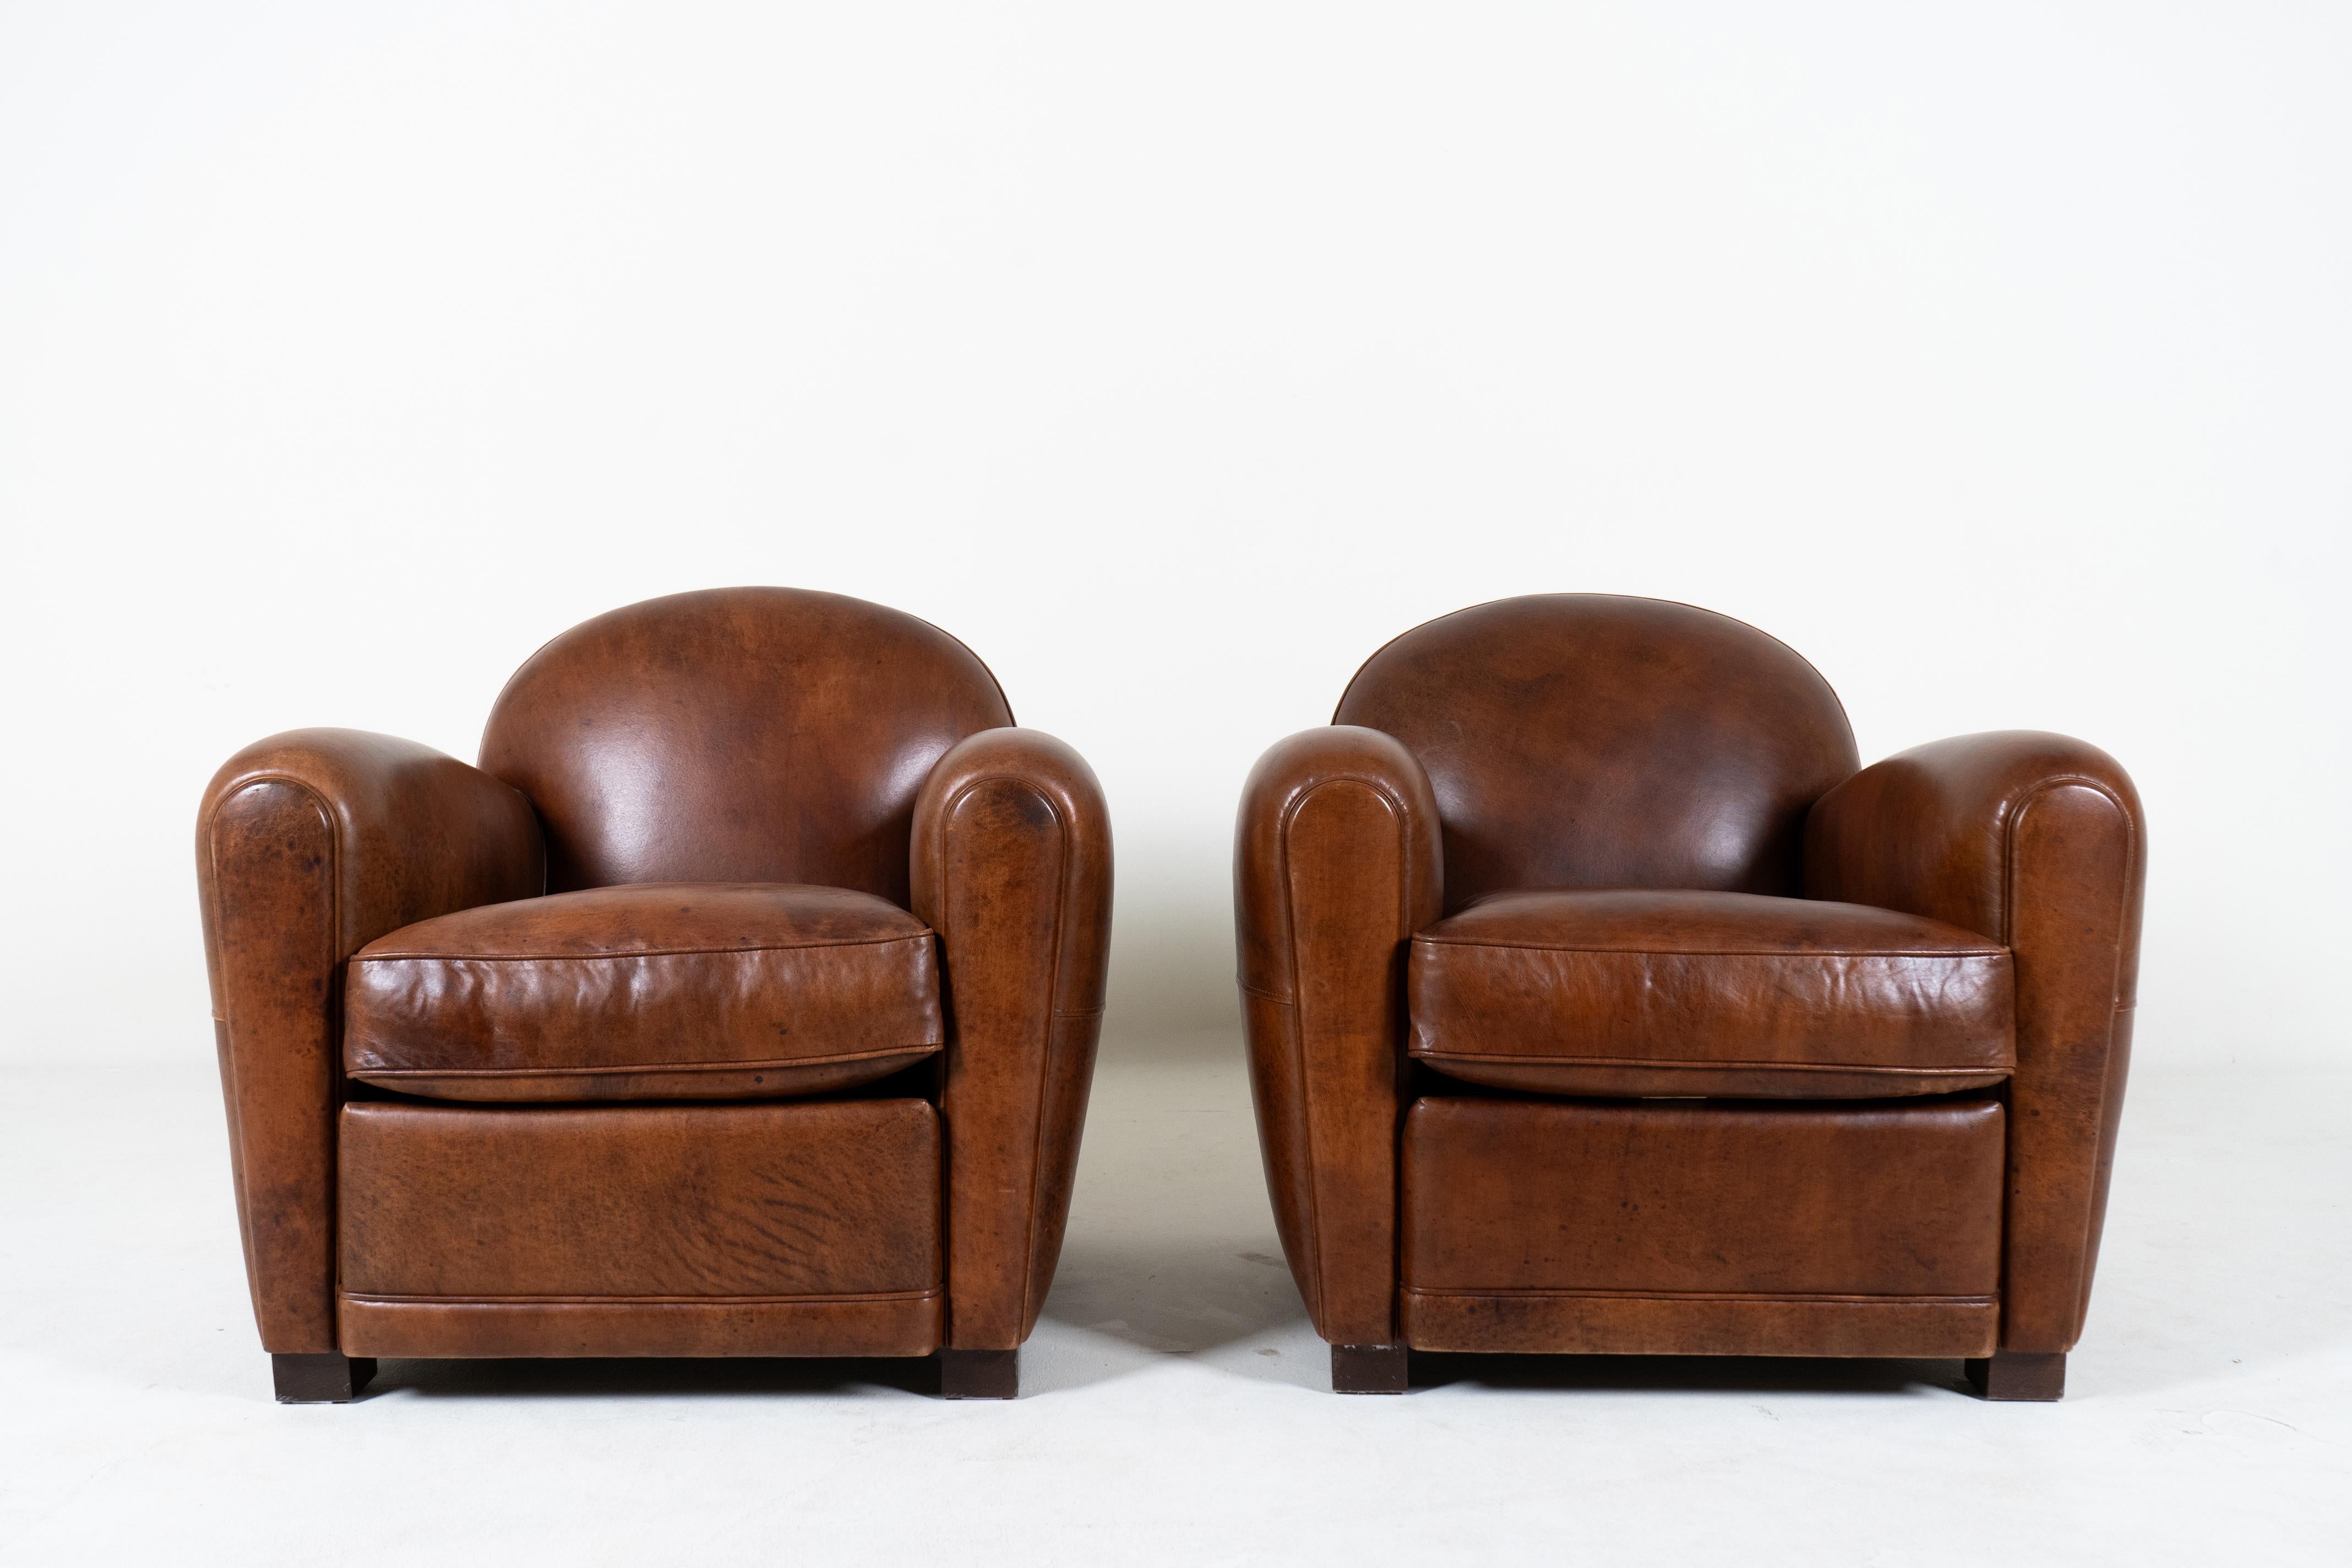 This pair of contemporary French Art Deco club chairs are a rare find. With a design dating to the Art Moderne movement from the 1920s-1940s, these chairs define an era of Parisian style. The striking nut-brown color has a beautiful softness and